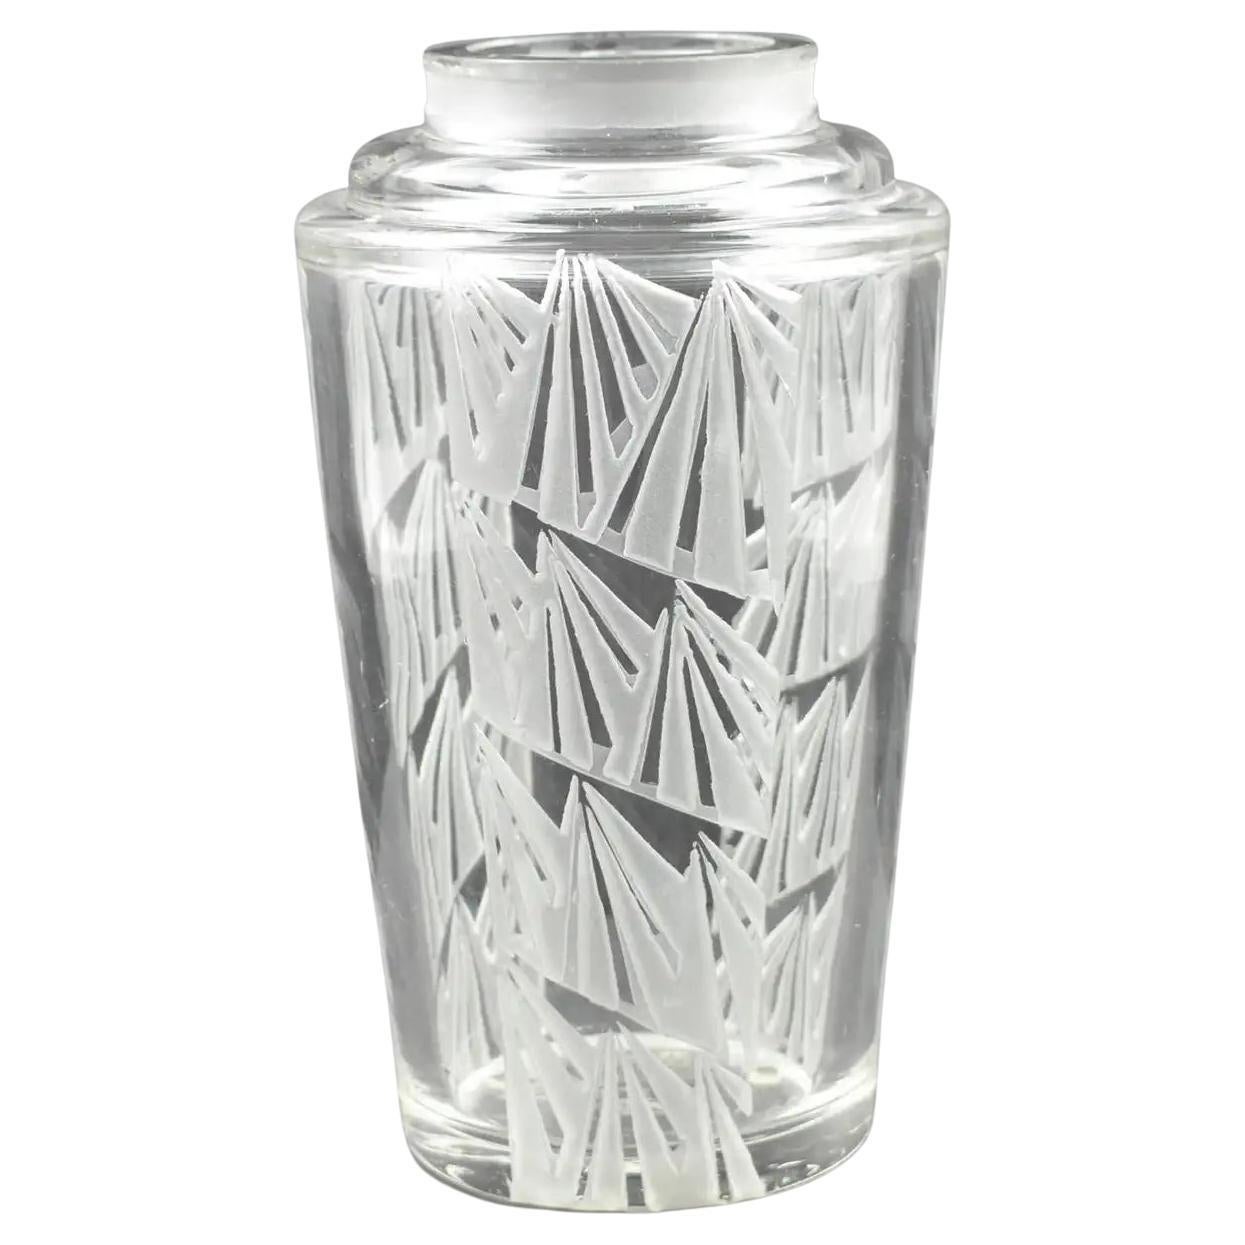 Jean Luce Art Deco Geometric Etched Glass Vase, 1930s For Sale